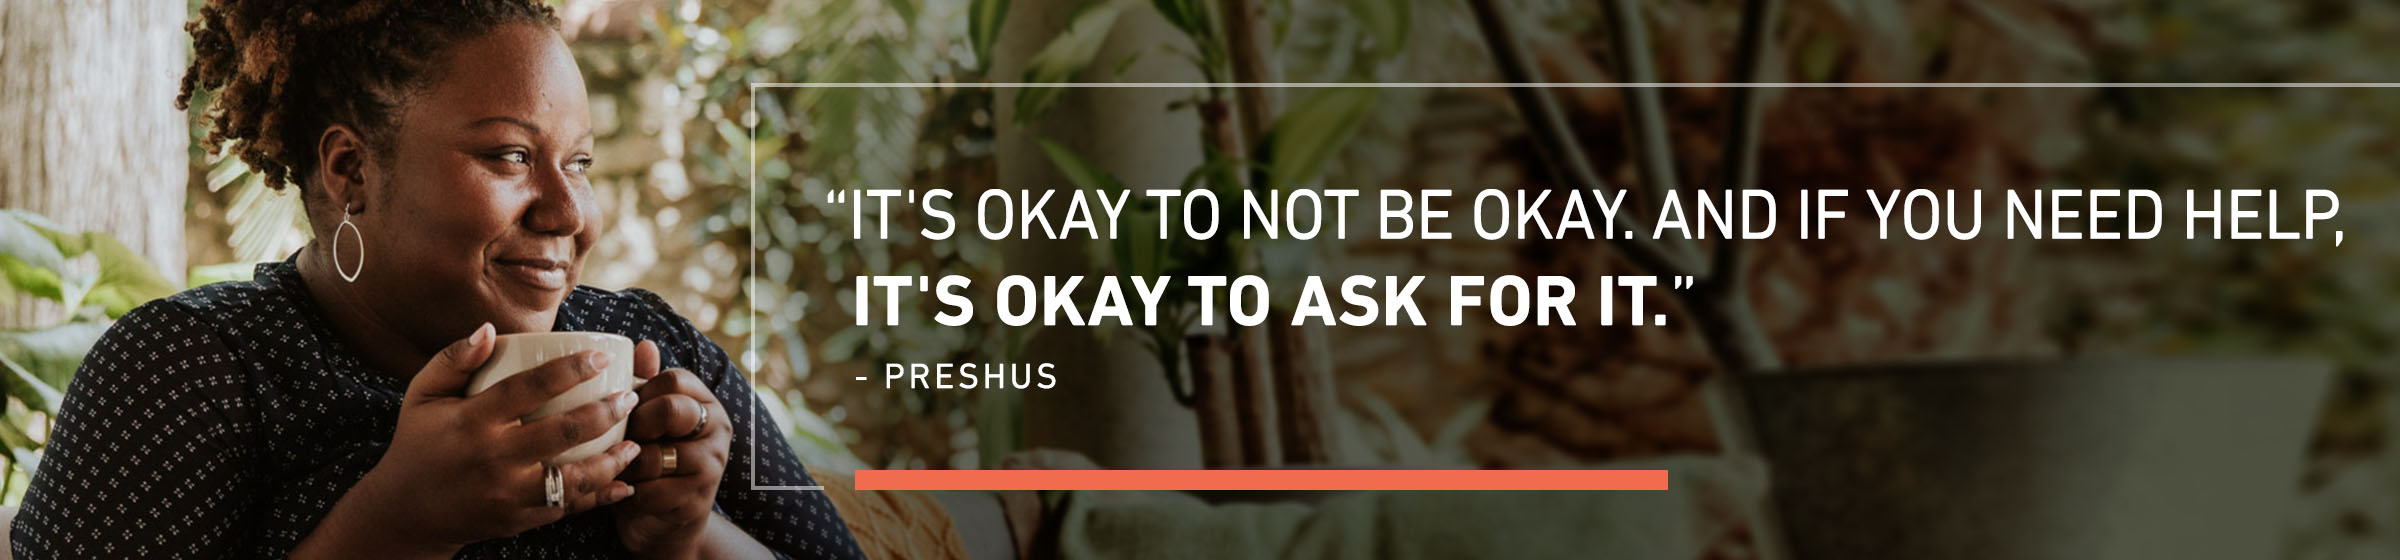 It’s okay to not be okay. And if you need help, it’s okay to ask for it.